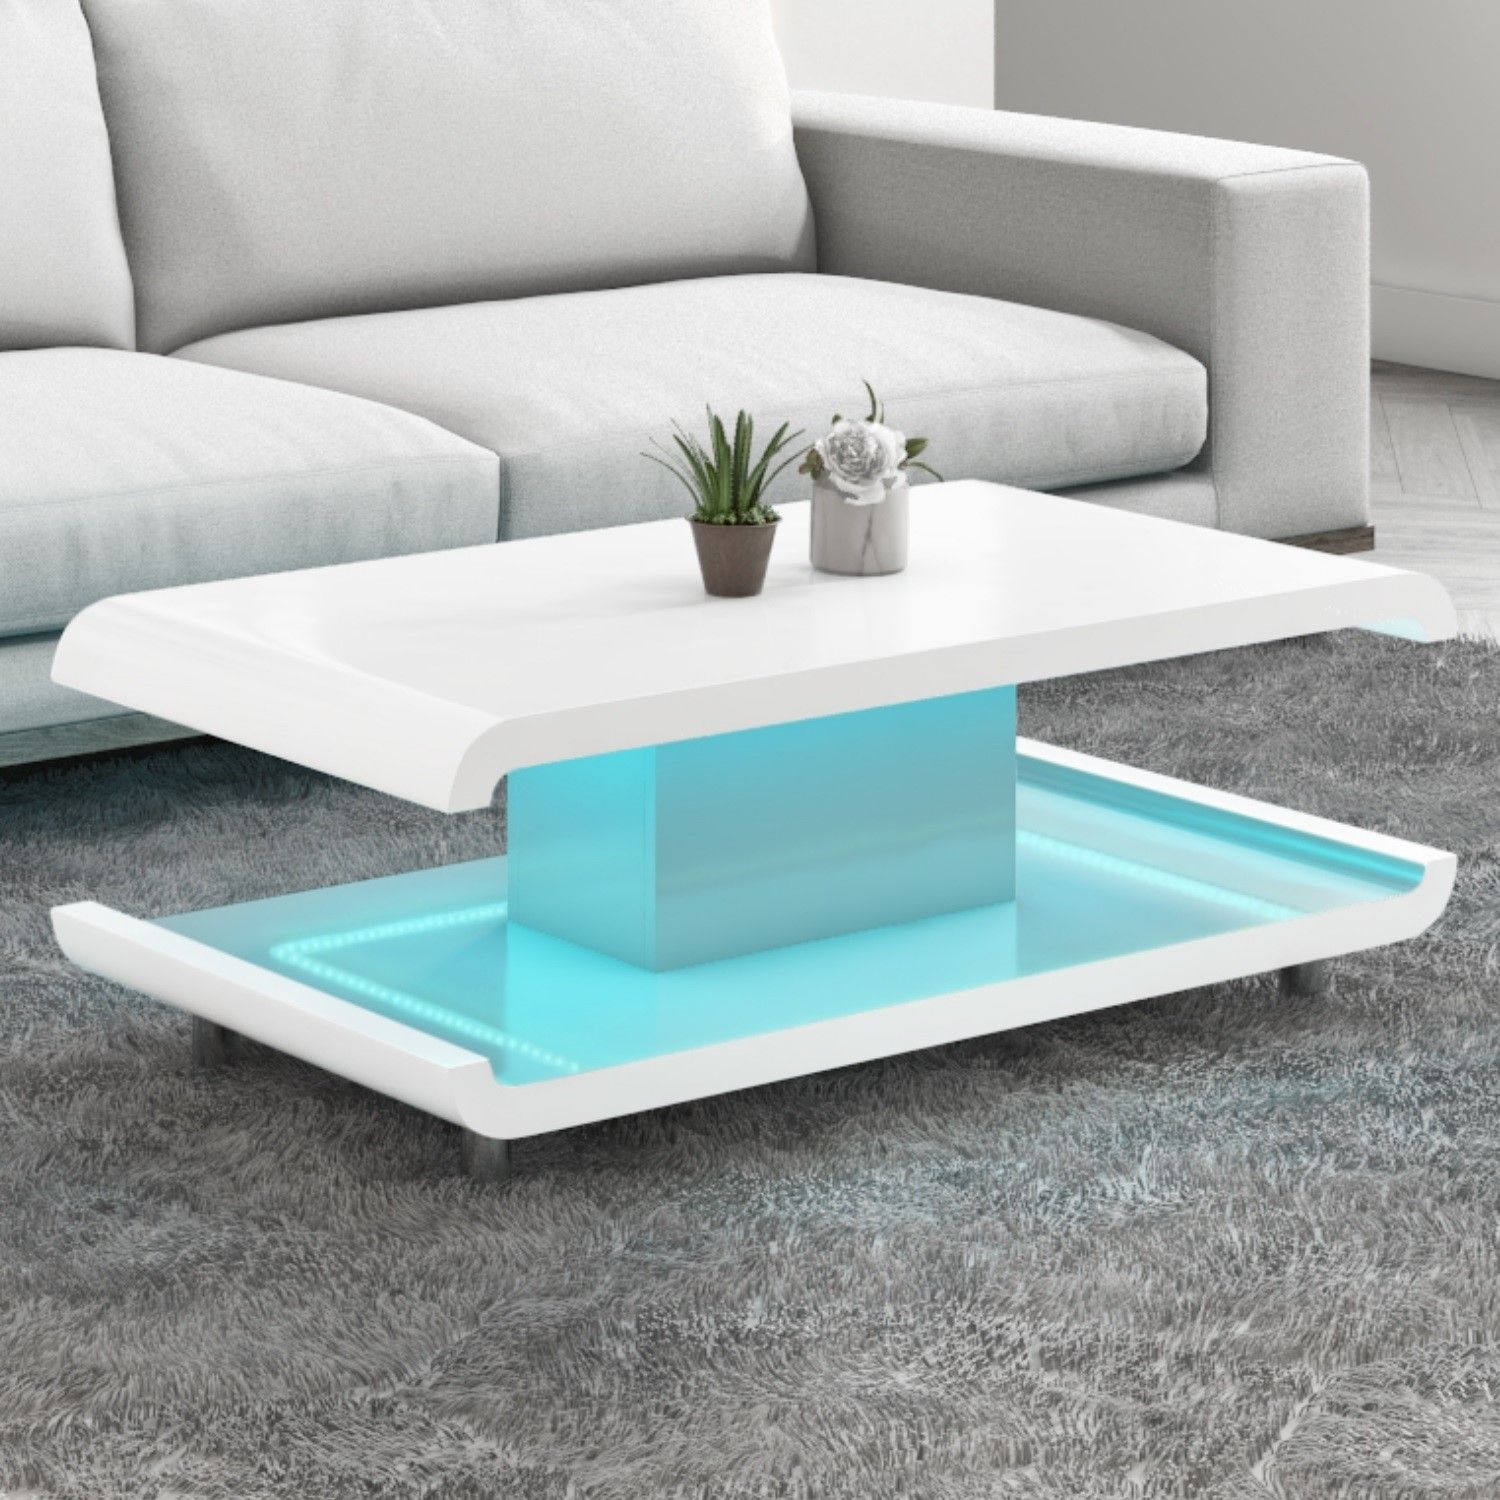 High Gloss White Coffee Table Led Range | Offer Of The Day With Coffee Tables With Led Lights (View 11 of 15)